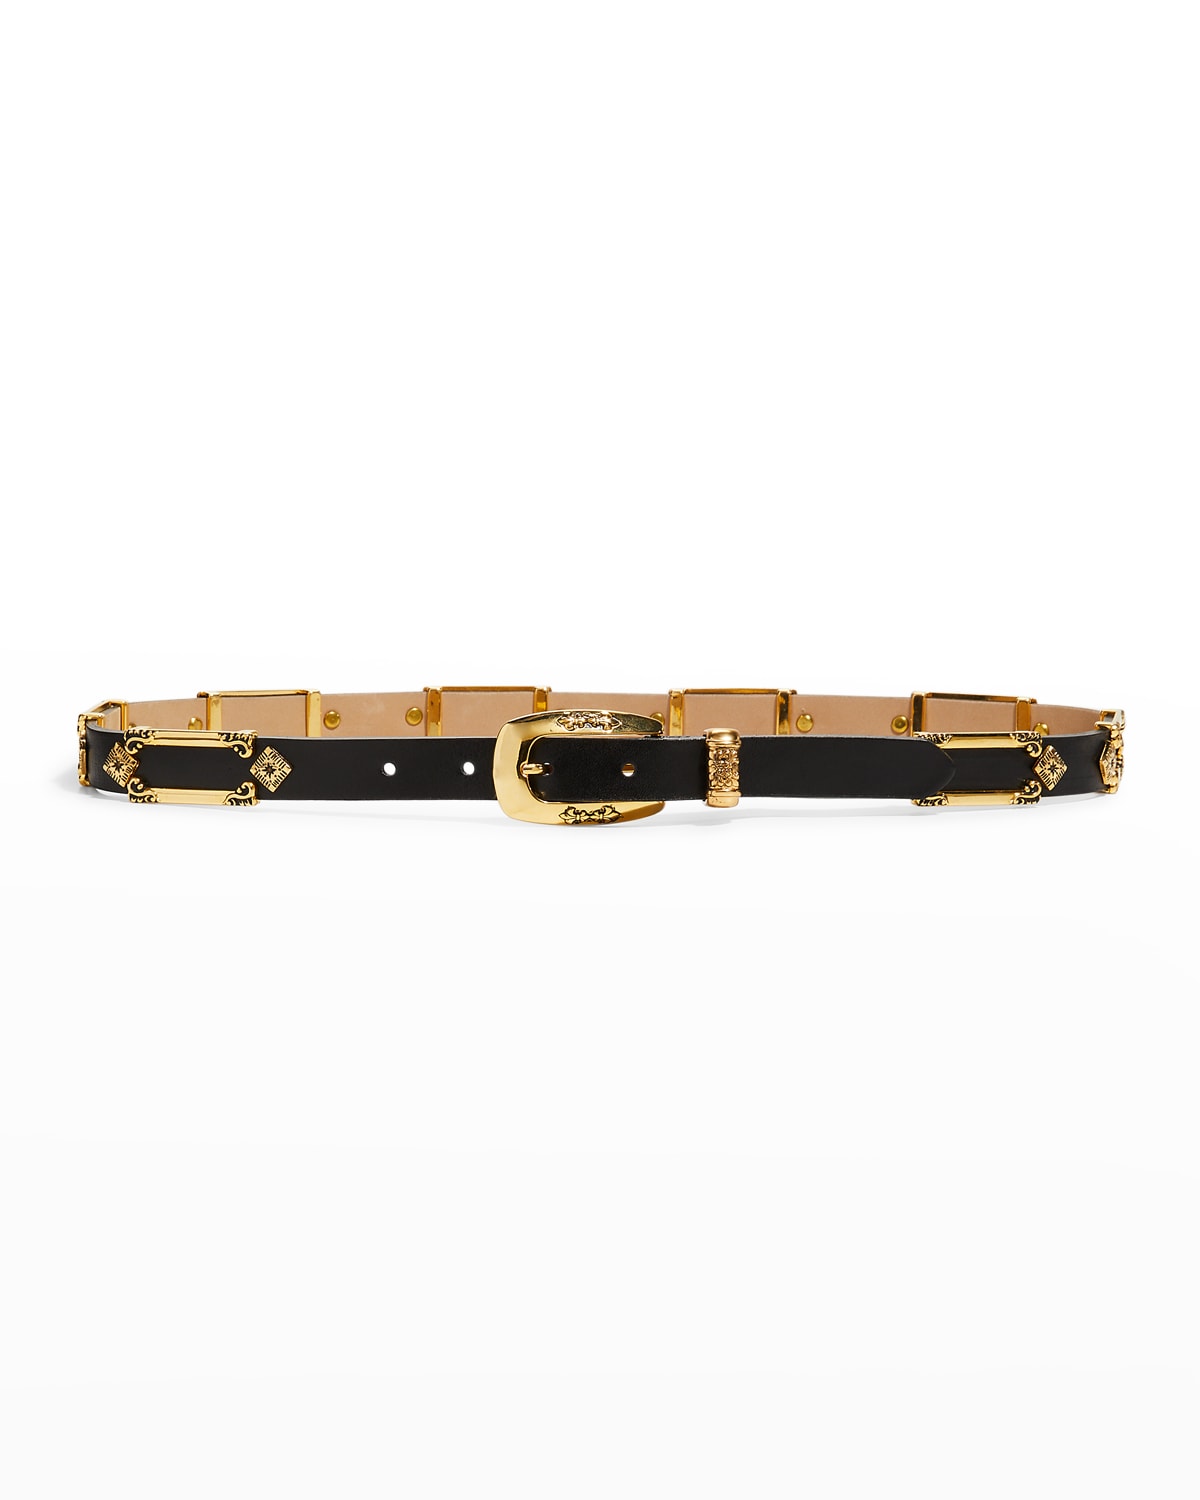 STREETS AHEAD ANTIQUE LEATHER SKINNY BELT